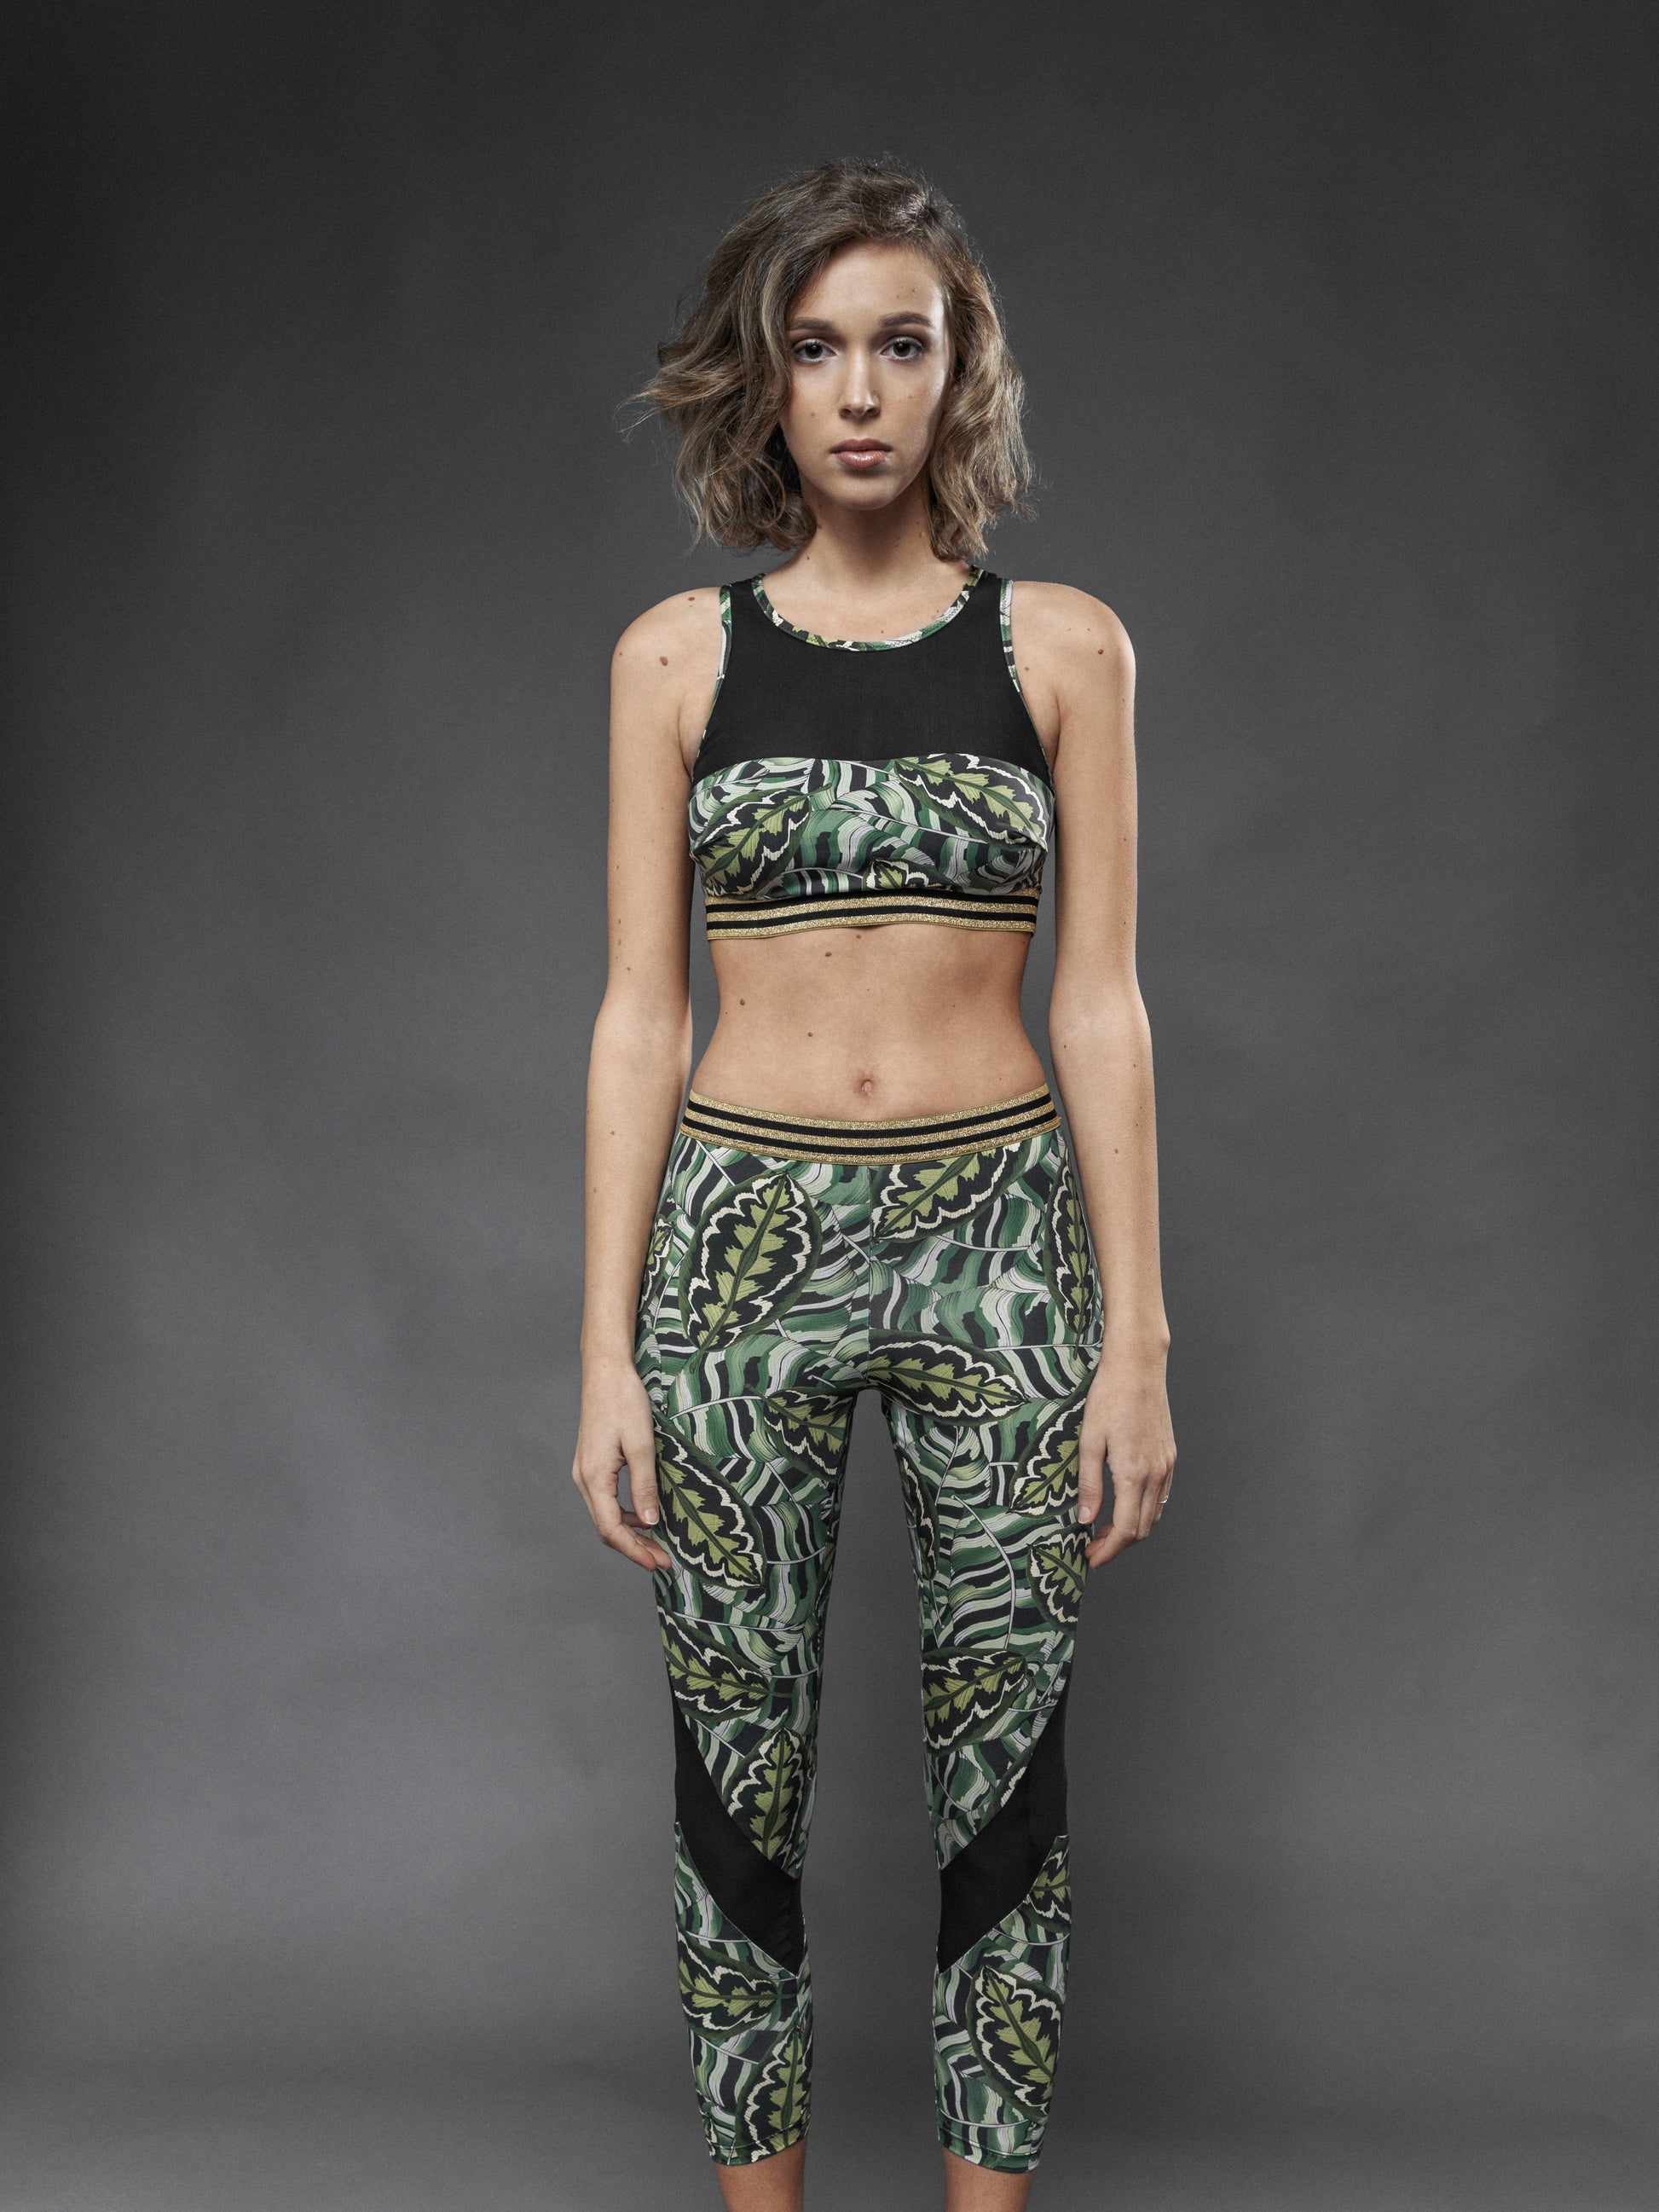 Jungle Sports Leggings - Luxury underwear and lingerie made in Italy. –  Carami